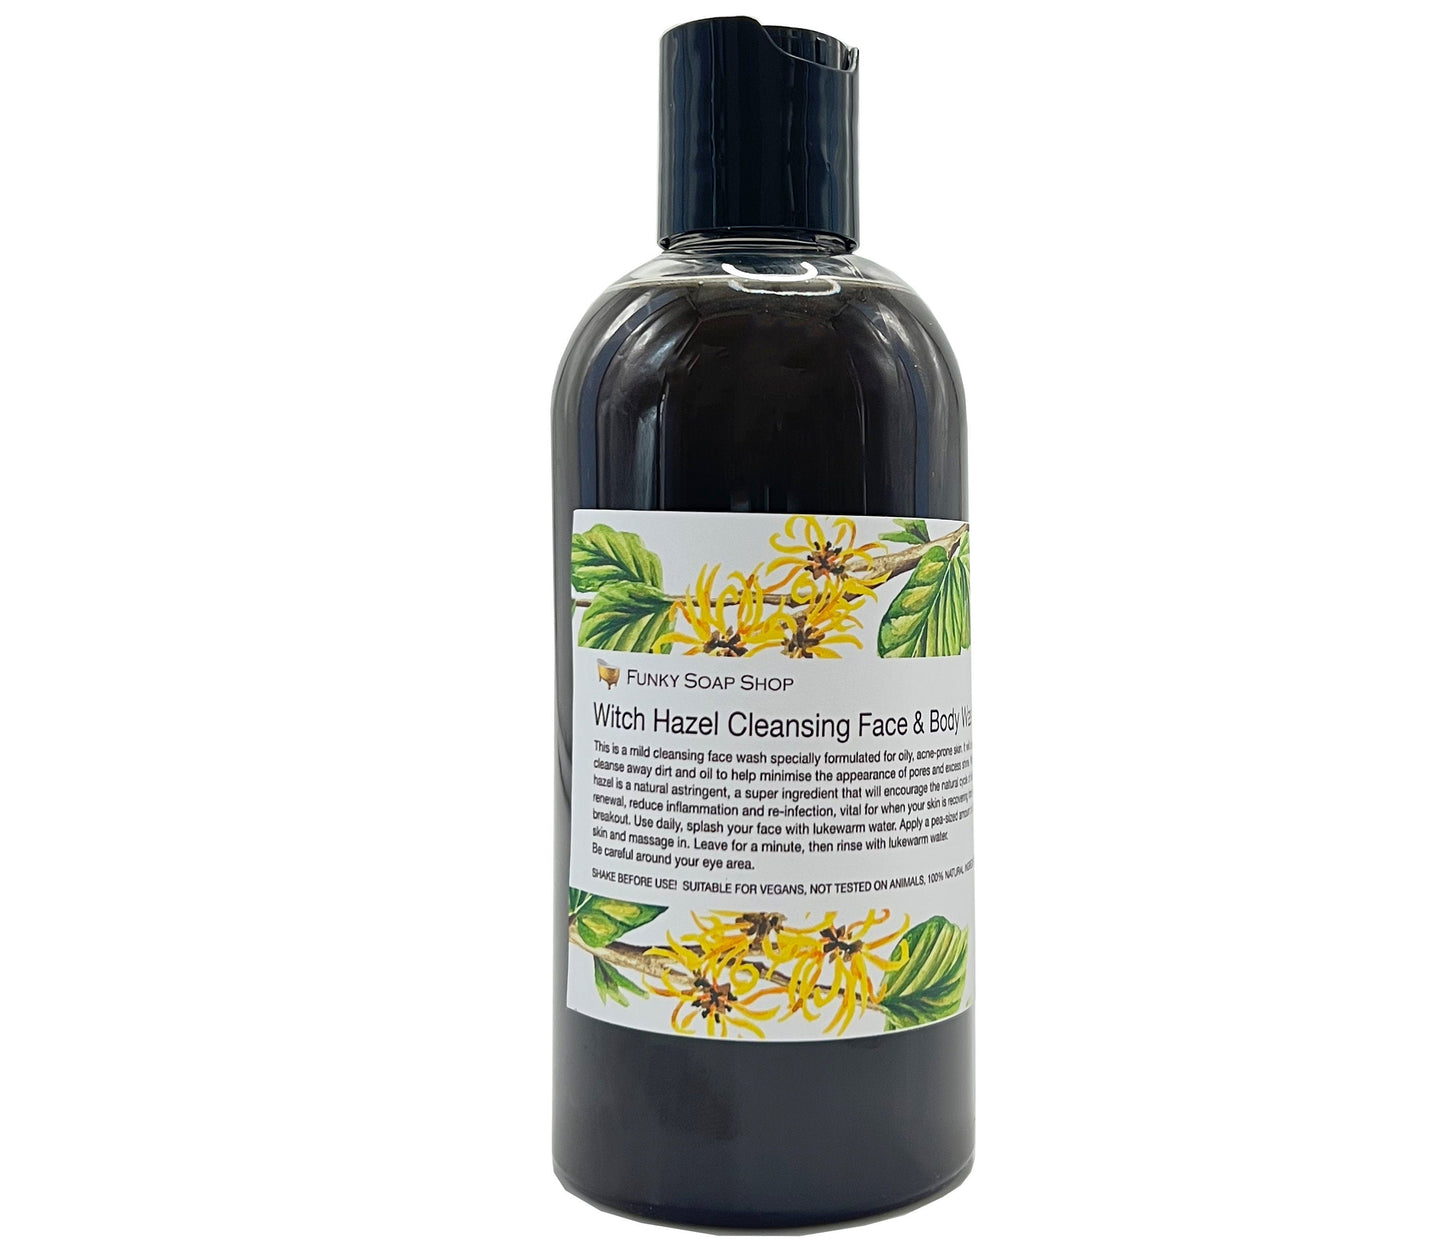 Witch Hazel Cleansing Face & Body Wash - Funky Soap Shop